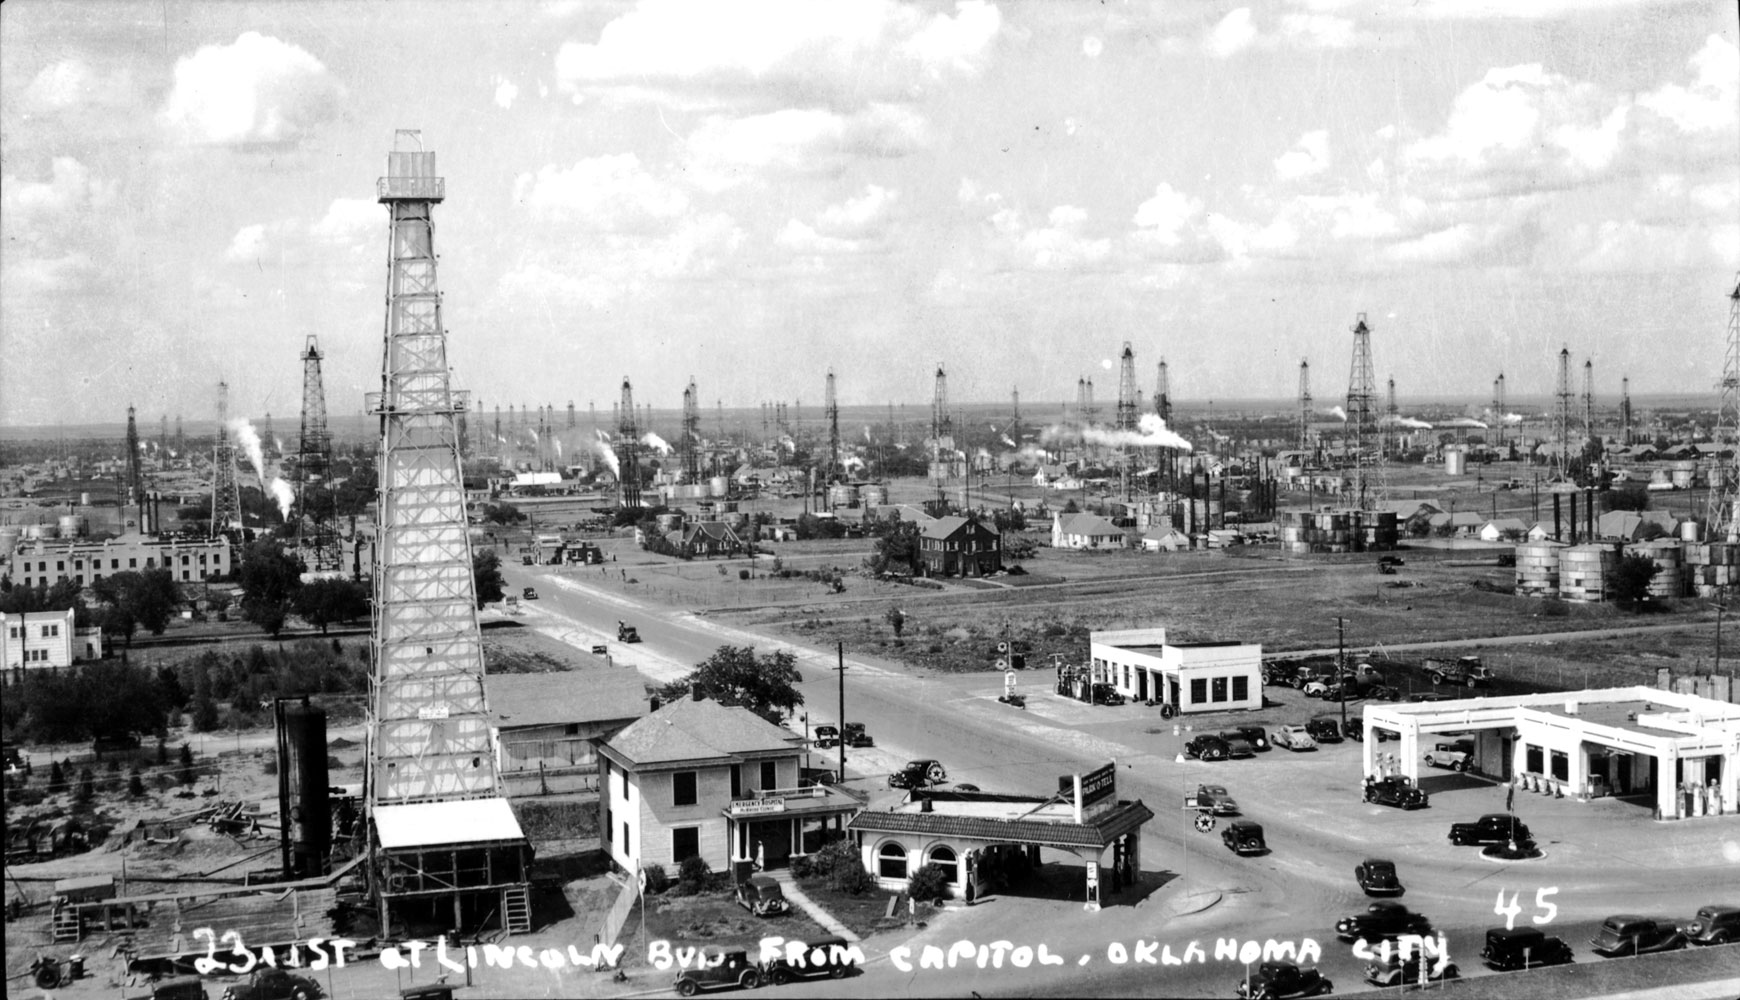 (RAC.2010.09.32) - Intersection of NE 23 and Lincoln, View South from the State Capitol, c. late 1930s